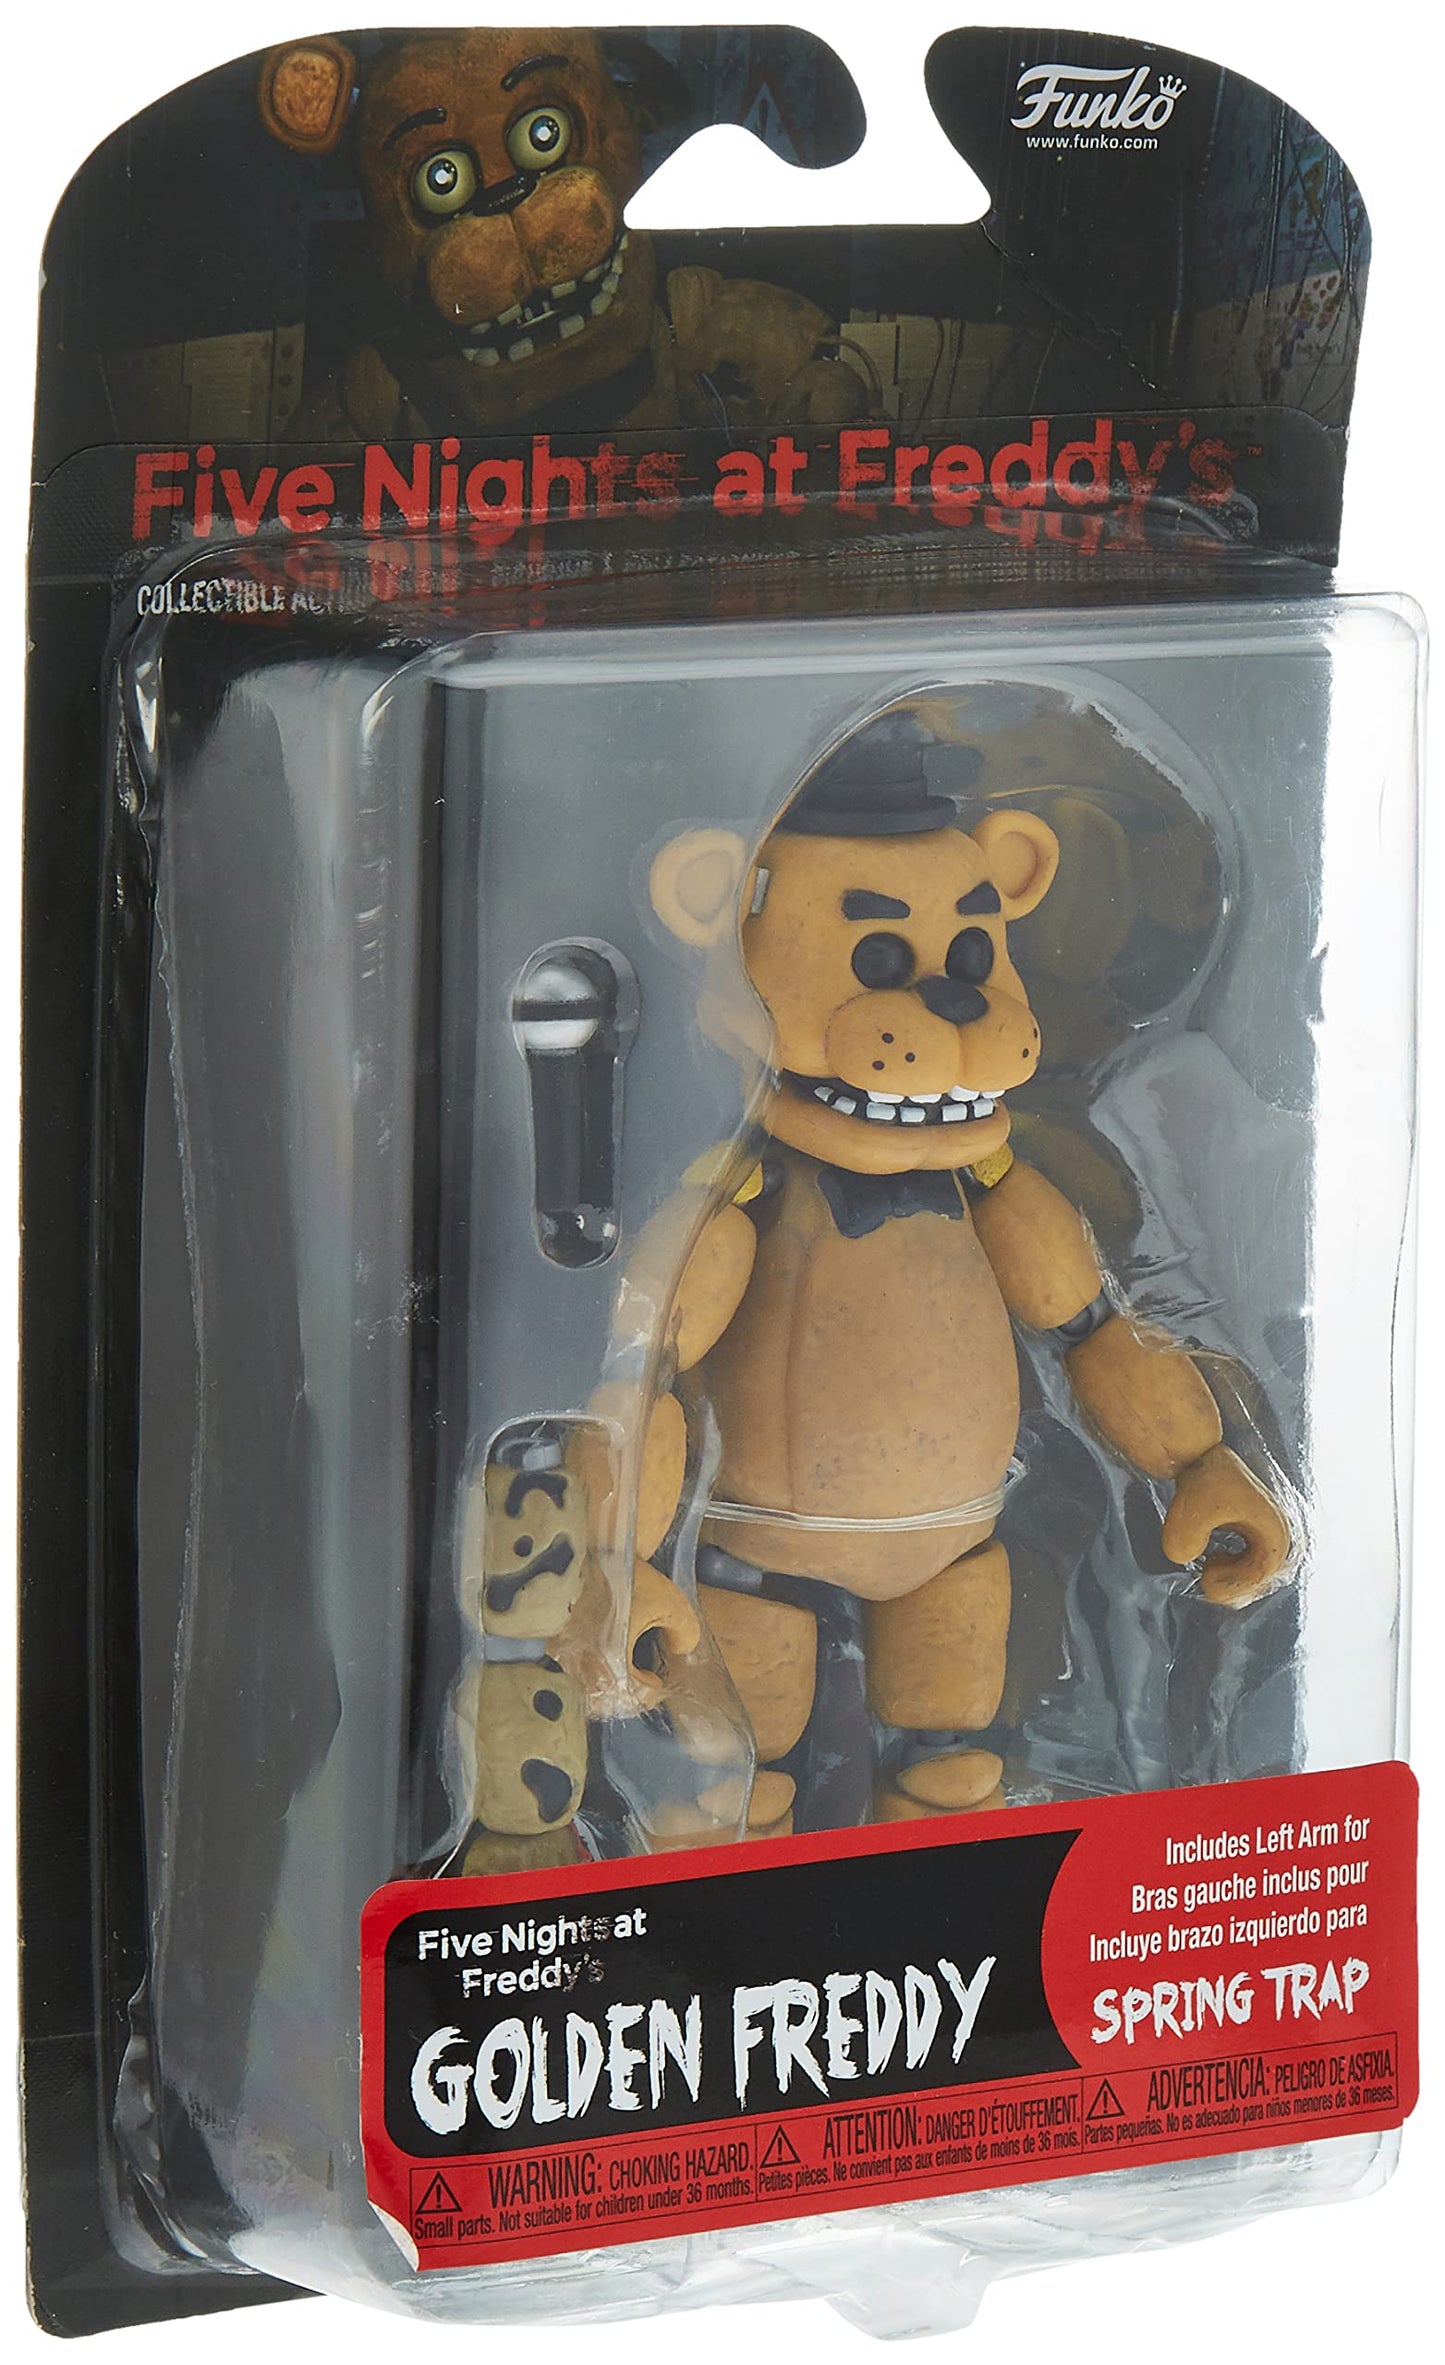 Funko Five Nights at Freddy's Series 1 Build Spring Trap Golden Freddy Action Figure